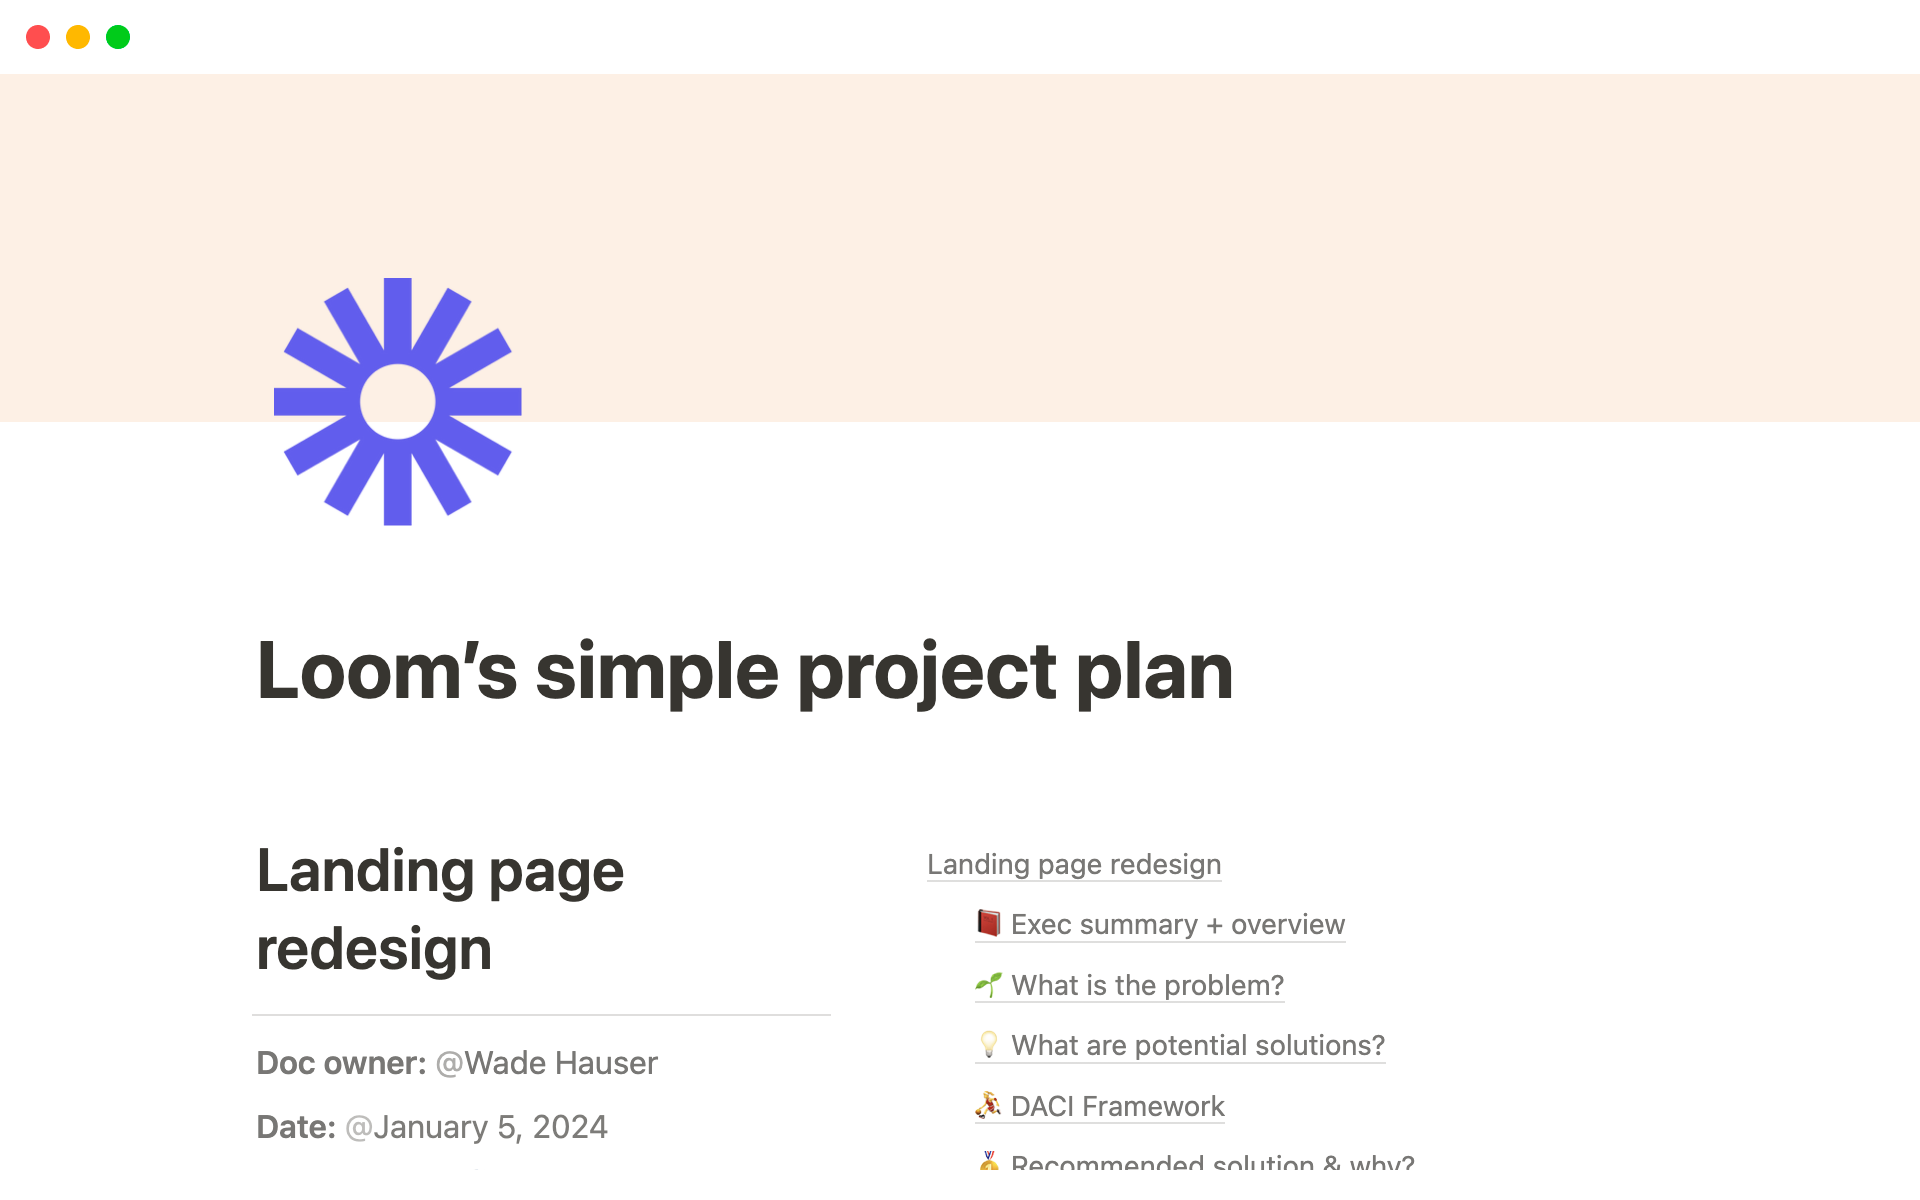 Loom uses this simple project plan template to help their team structure their thoughts and drive async communication - all without meetings.